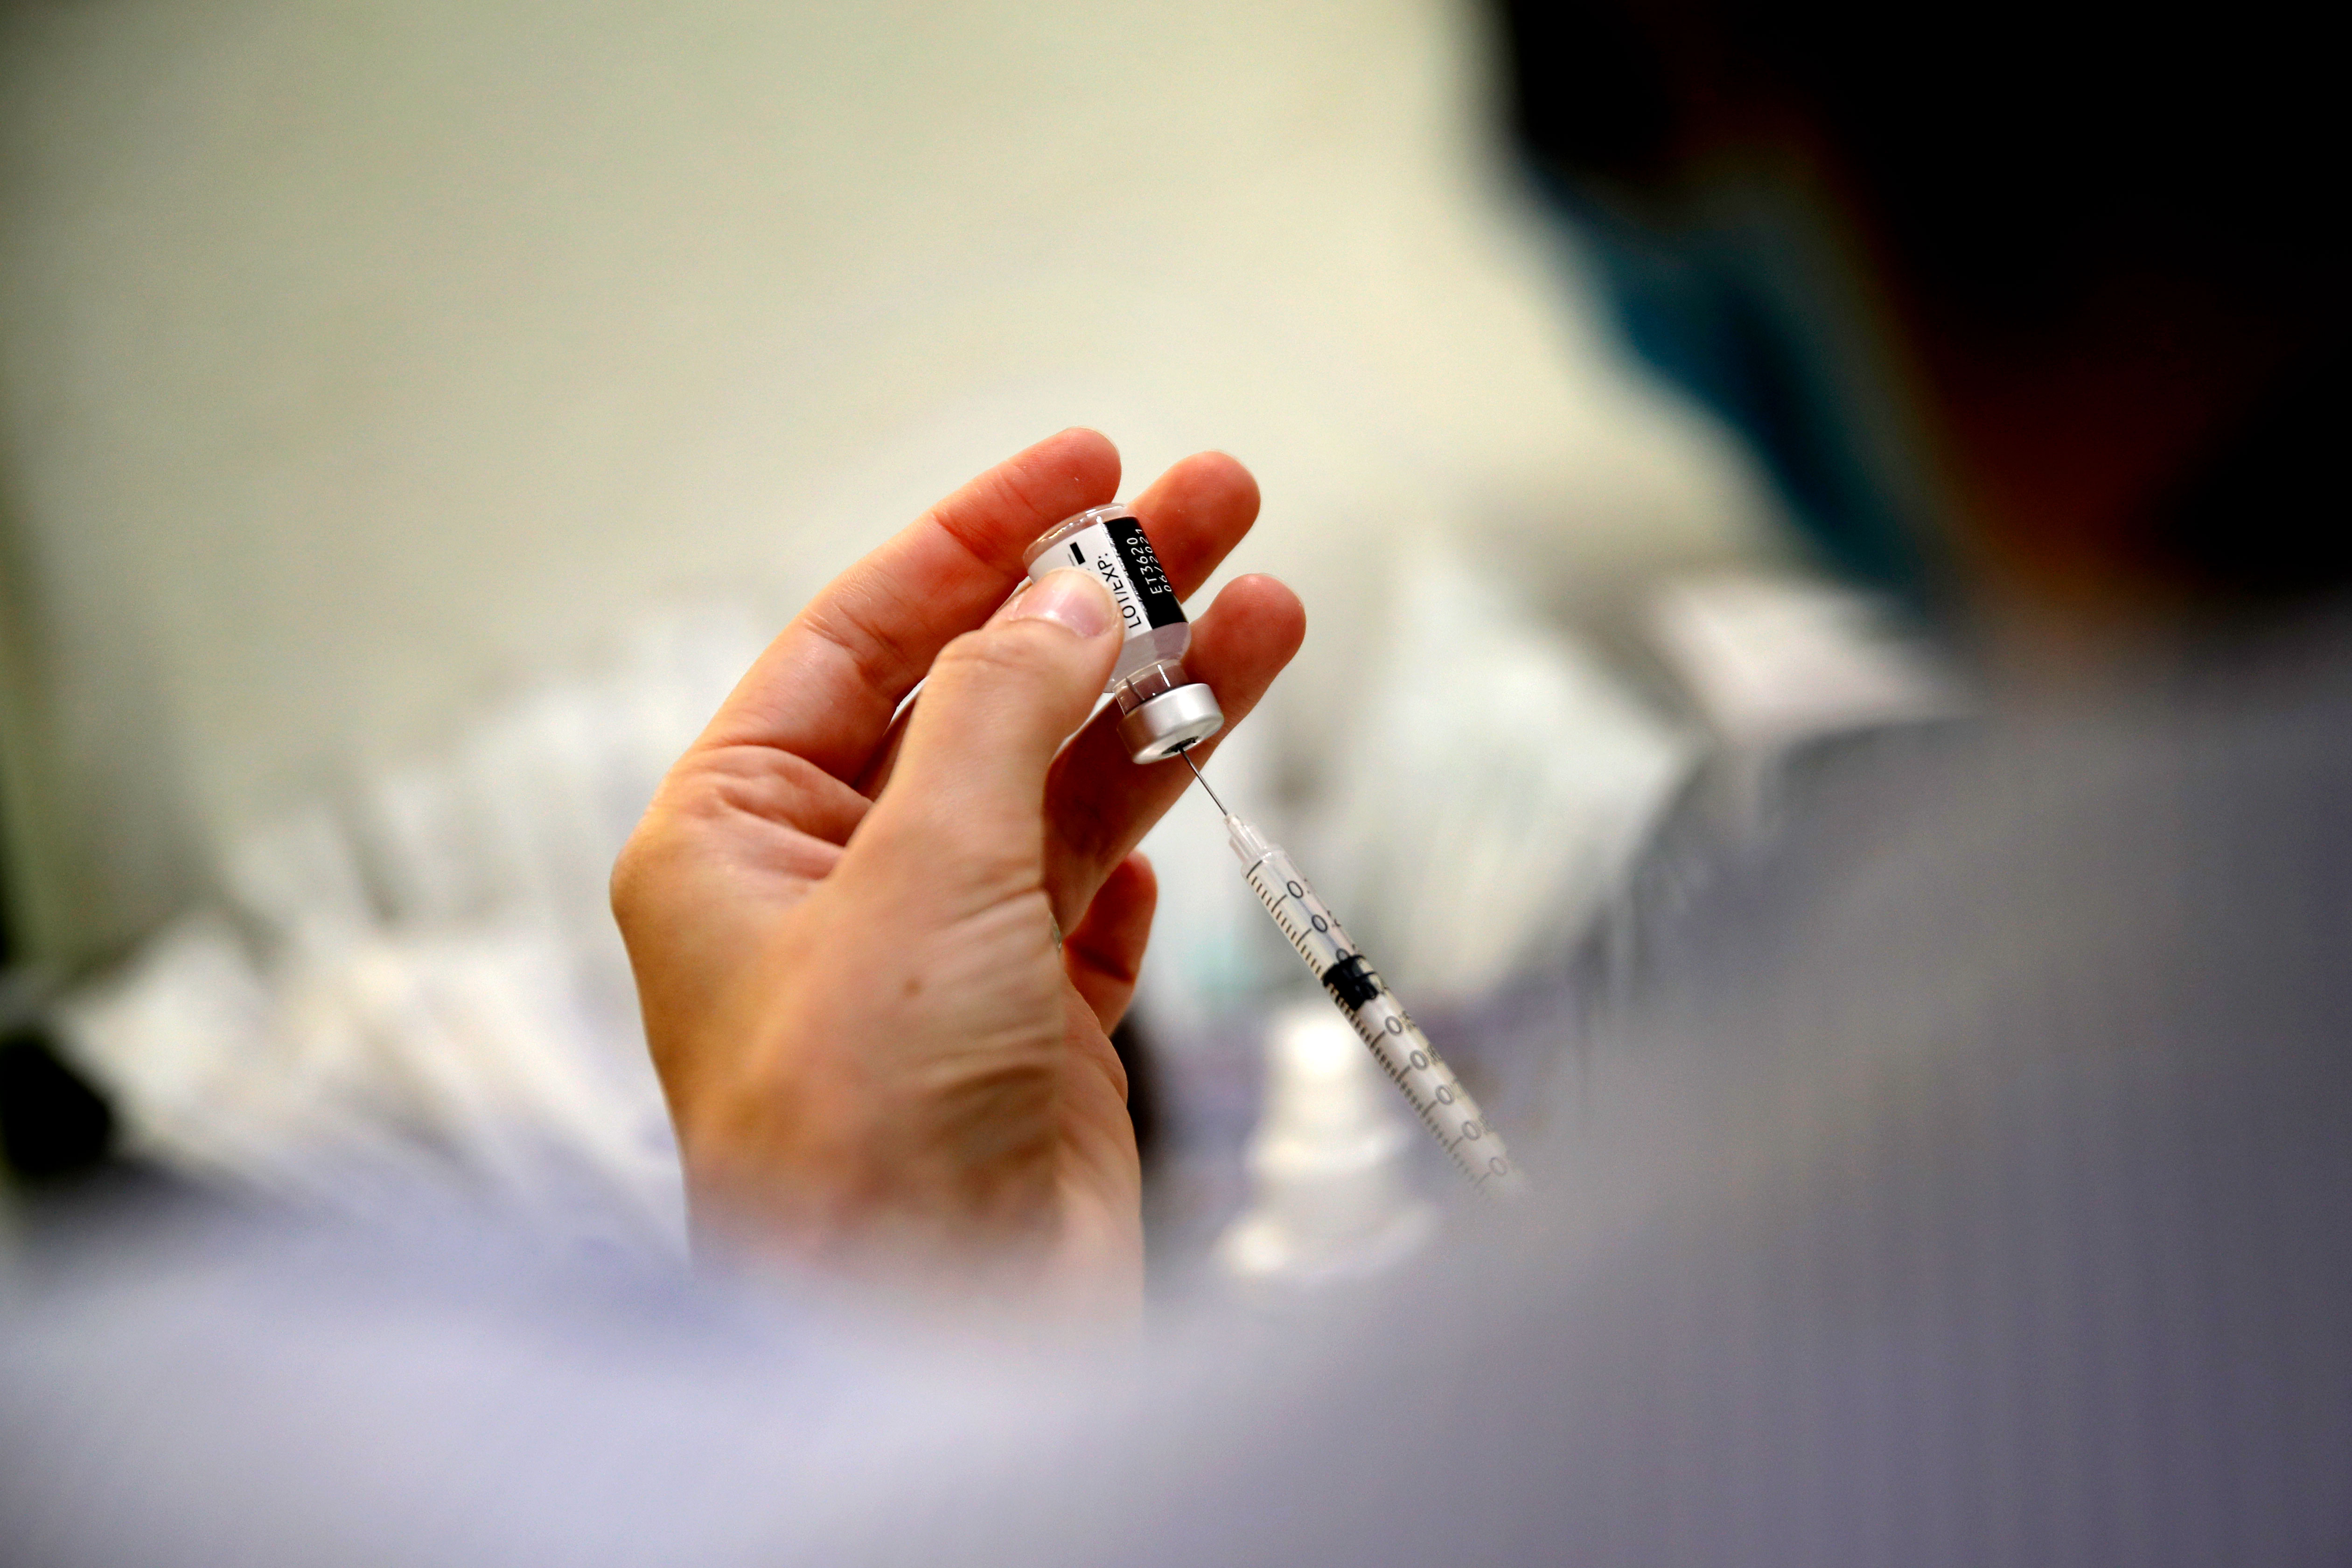 A medical staff member prepares the Pfizer Covid-19 vaccine in Boulogne-Billancourt, France, on March 19.